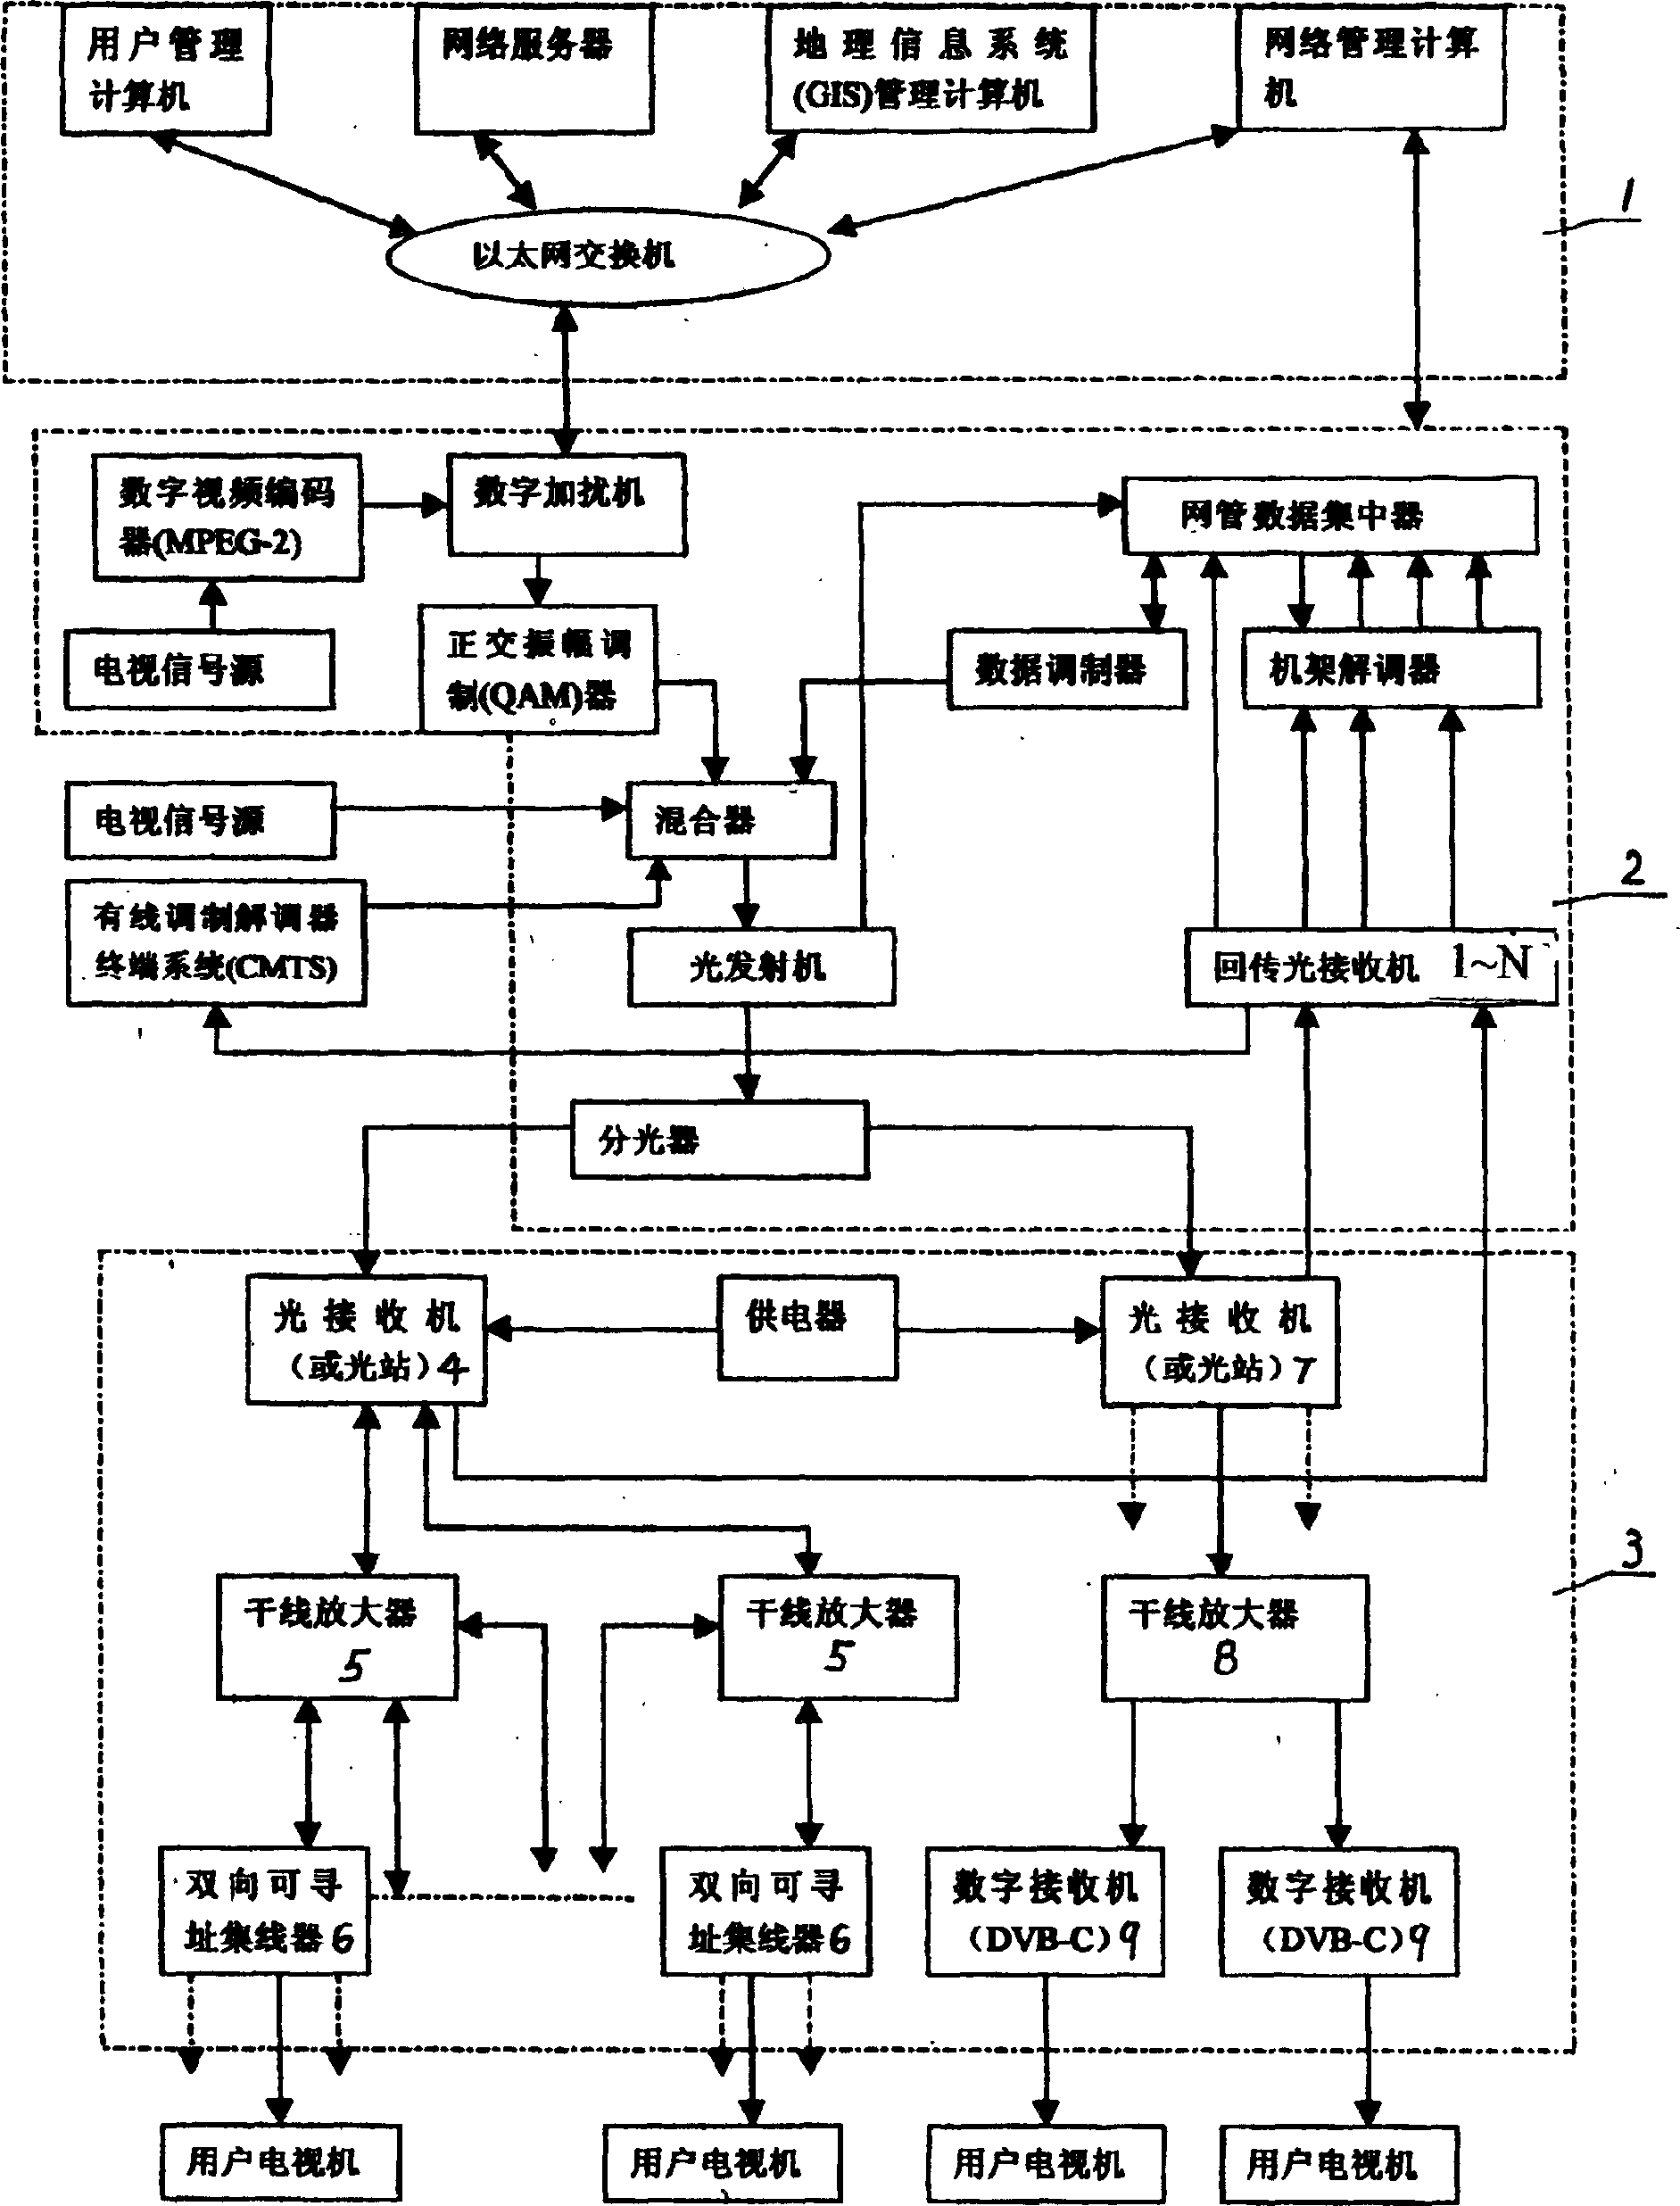 Method in use for determining topological structure of cable TV HFC network